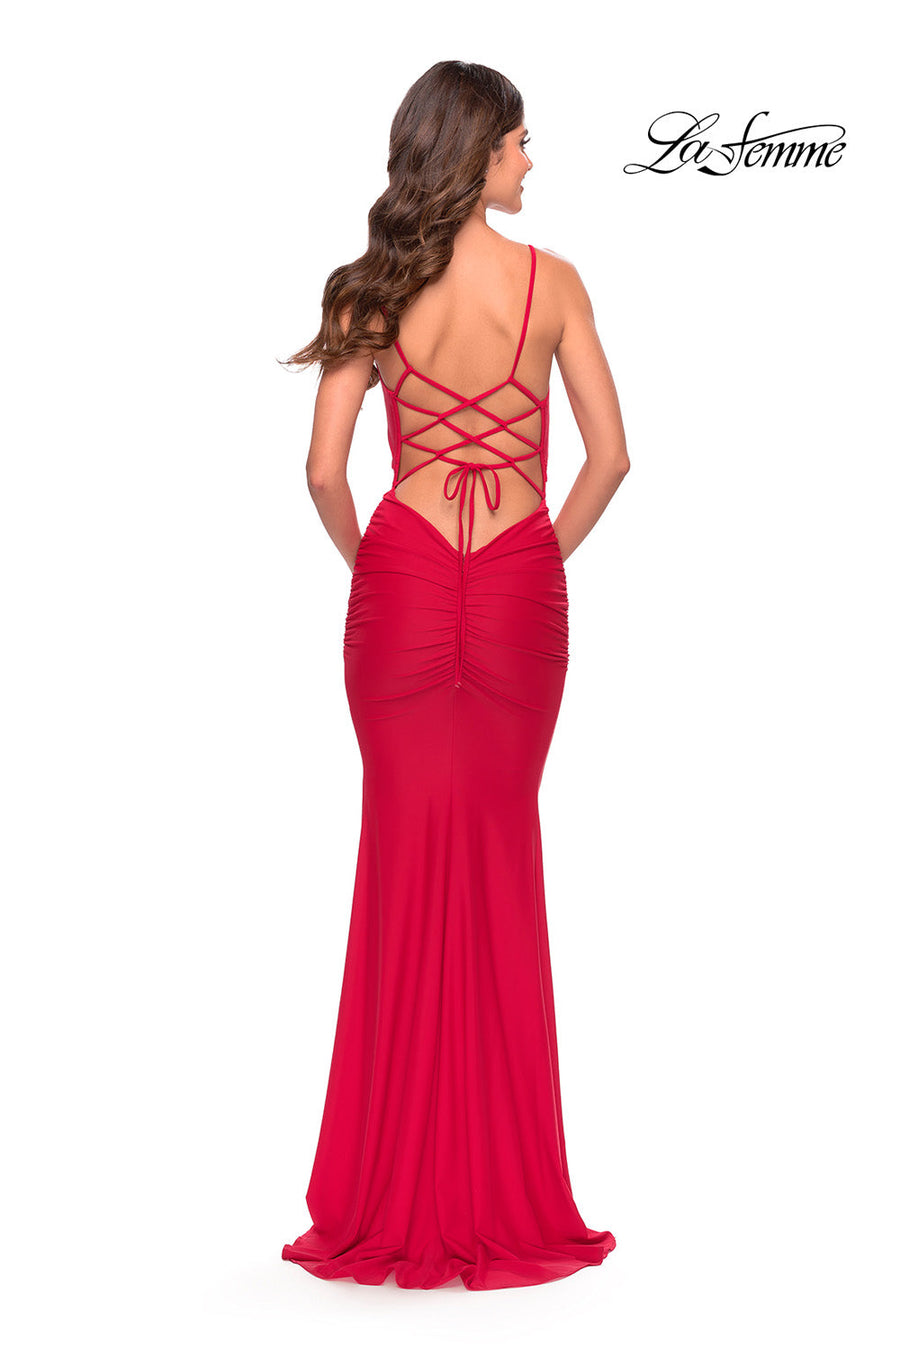 La Femme 31294 prom dress images.  La Femme 31294 is available in these colors: Black, Red, Royal Blue.